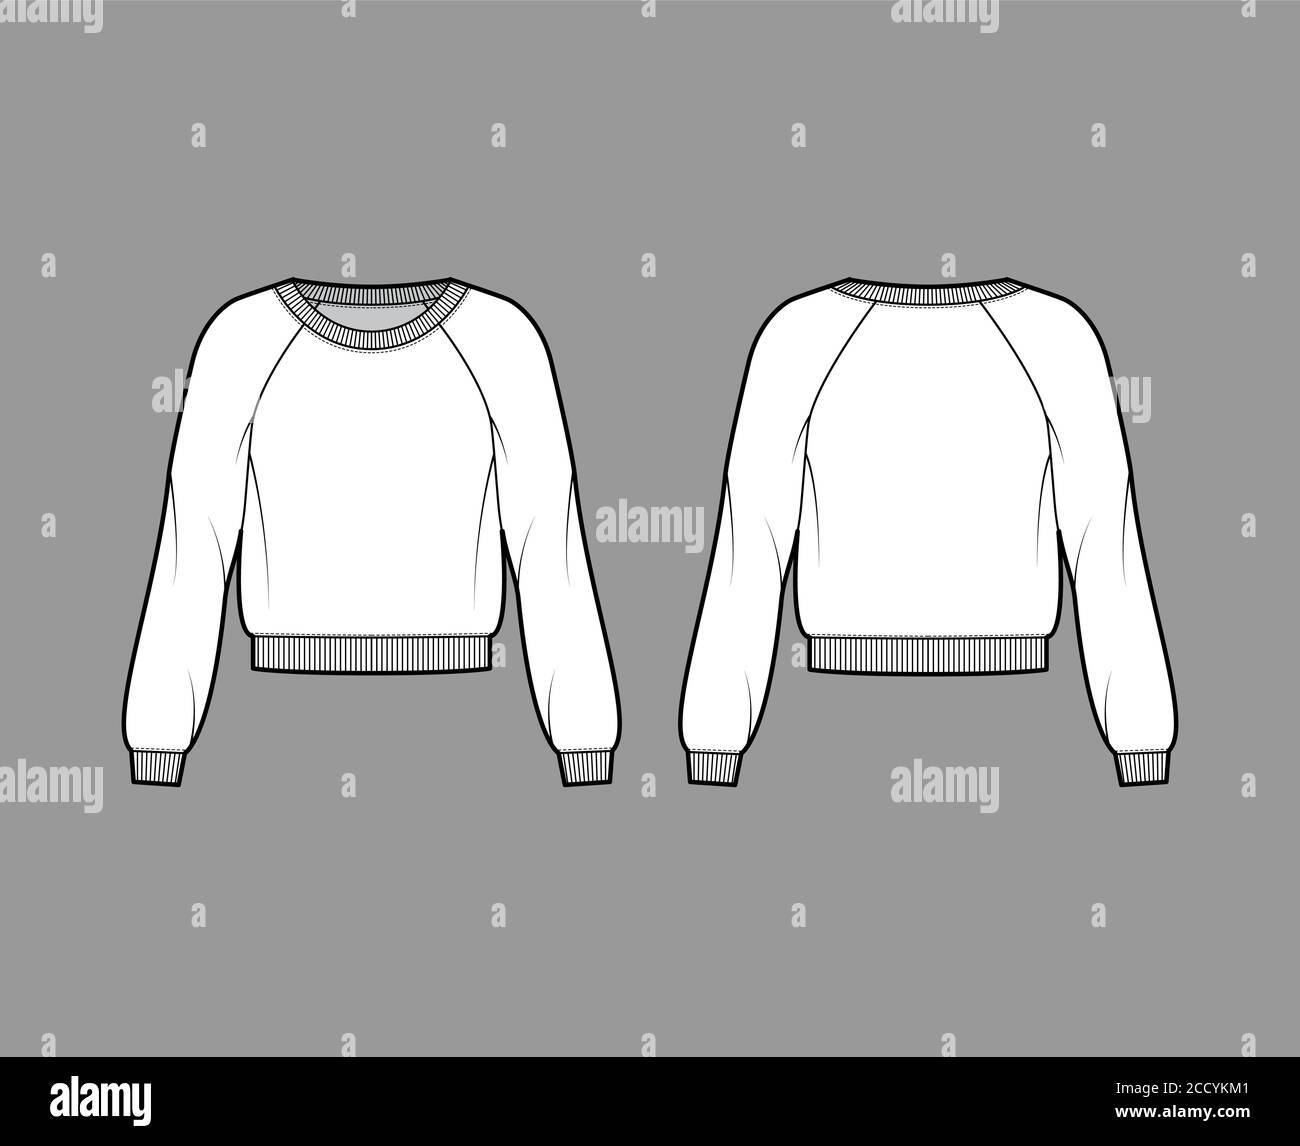 Cotton-terry sweatshirt technical fashion illustration with relaxed fit, scoop neckline, long raglan sleeves, ribbed trims. Flat jumper apparel template front back white color. Women, men unisex top Stock Vector